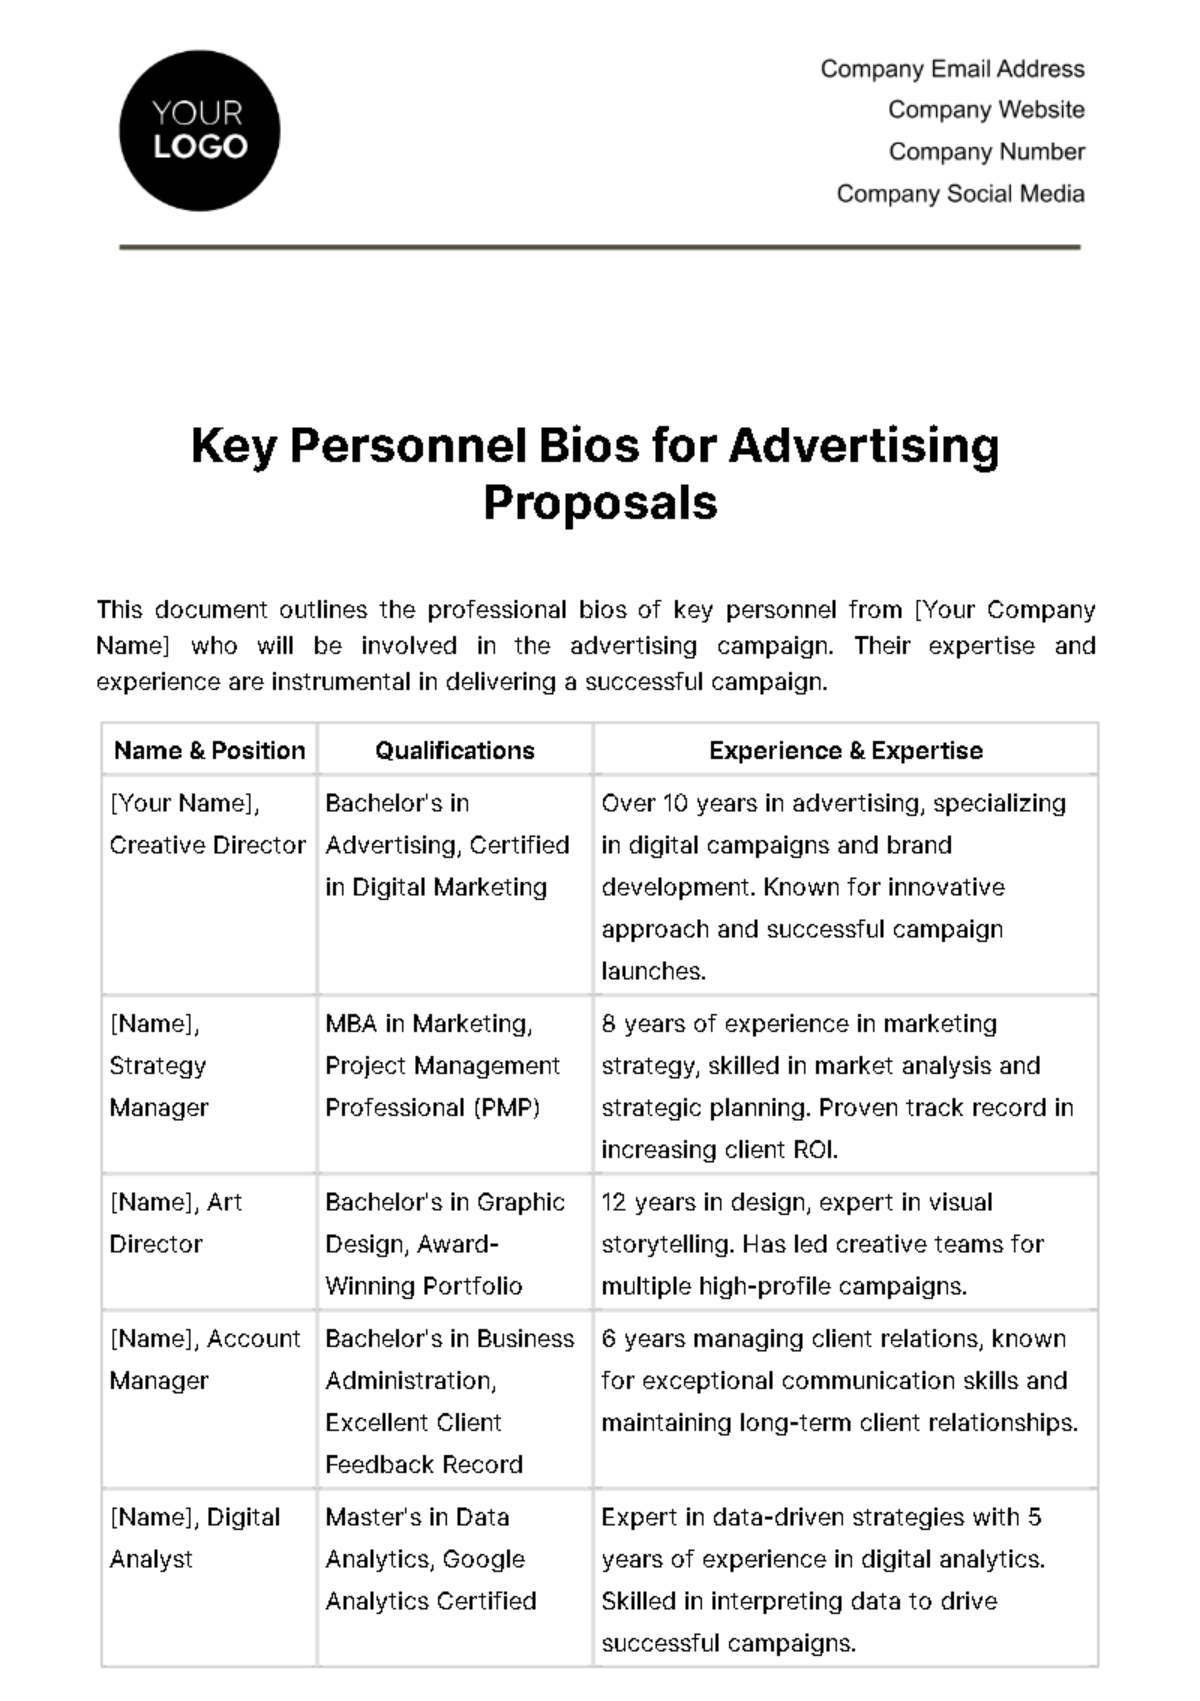 Key Personnel Bios for Advertising Proposals Template